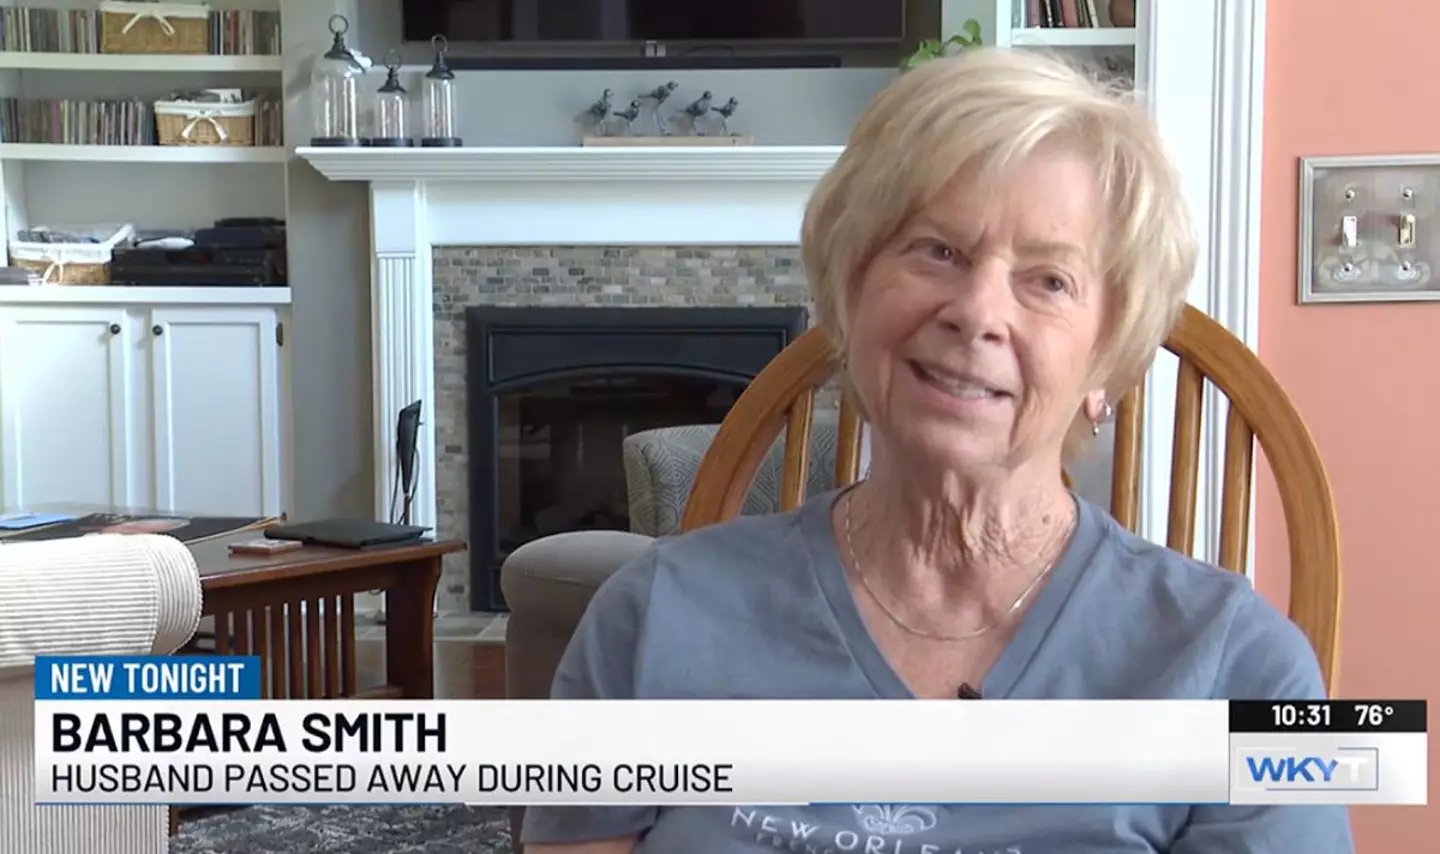 Barbara expressed her disappointment for the 'lack of empathy' supposedly afforded to her (WKYT)